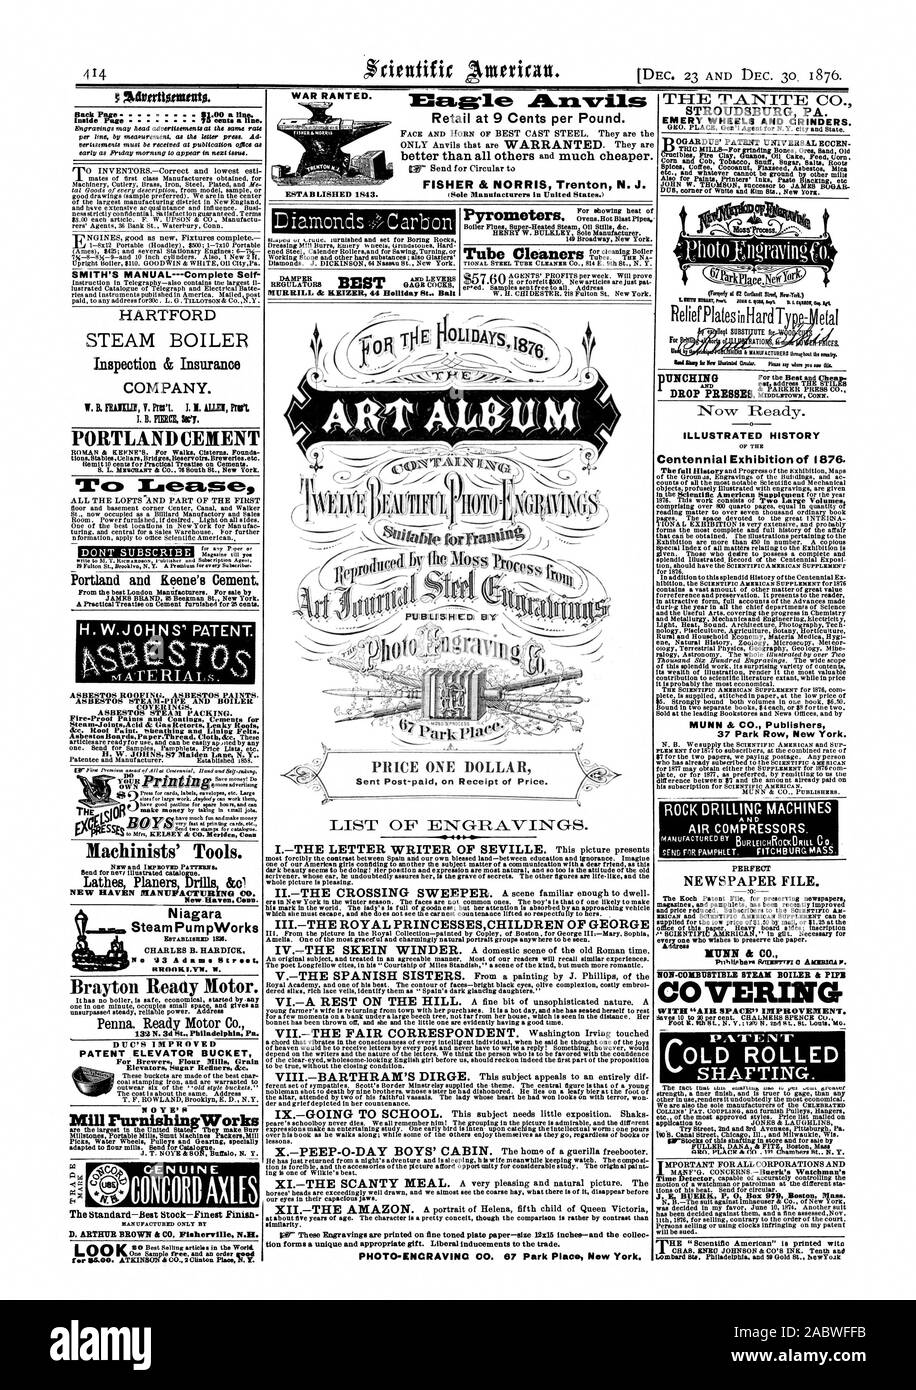 DEC. 23 AND DEC. 30 1876. Inside Page  76 cents a line. HARTFORD STEAM BOILER Inspection & Insurance COMPANY. H. W.J OH NS PATENT. mATERIALs. ASBESTOS ROOFING. ASBESTOS PAINTS. ASBESTOS STEAM-PIPE AND BOILER COVERINGS. ASBESTOS STEAM PACKING. Fire-Proof Paints and Coatings Cements for Steam-JointsAcid & Gas Retorts Leaky Roots &c. Root Paint. sheathing and Lining Felts.  B Machinists' Tools. ED FATTENS Lathes Planers' DrillsIcol NEW HAVEN MANUFACTURING CO. Steam Pum pWorks ESTABLISHED 1826. No 13 Adam. St RROOK LYN. W. Brayton Ready Motor. 1 DUC'S IMPROVED PATENT ELEVATOR BUCKET For Brewers Stock Photo